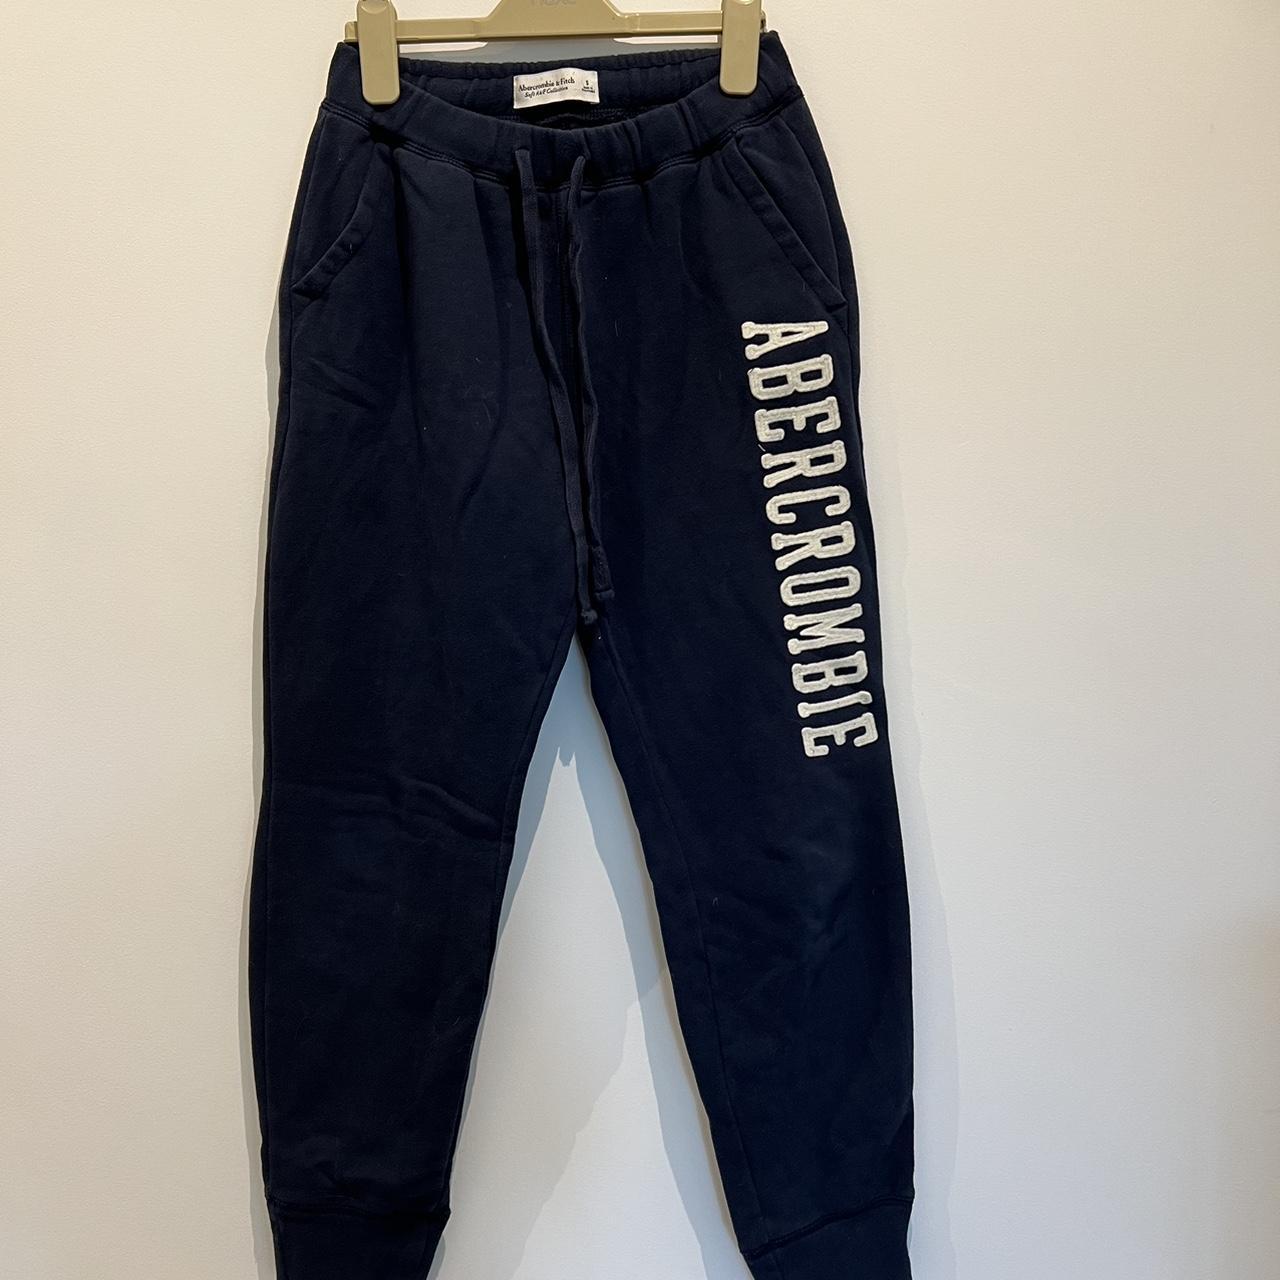 Abercrombie & Fitch Joggers - Depop